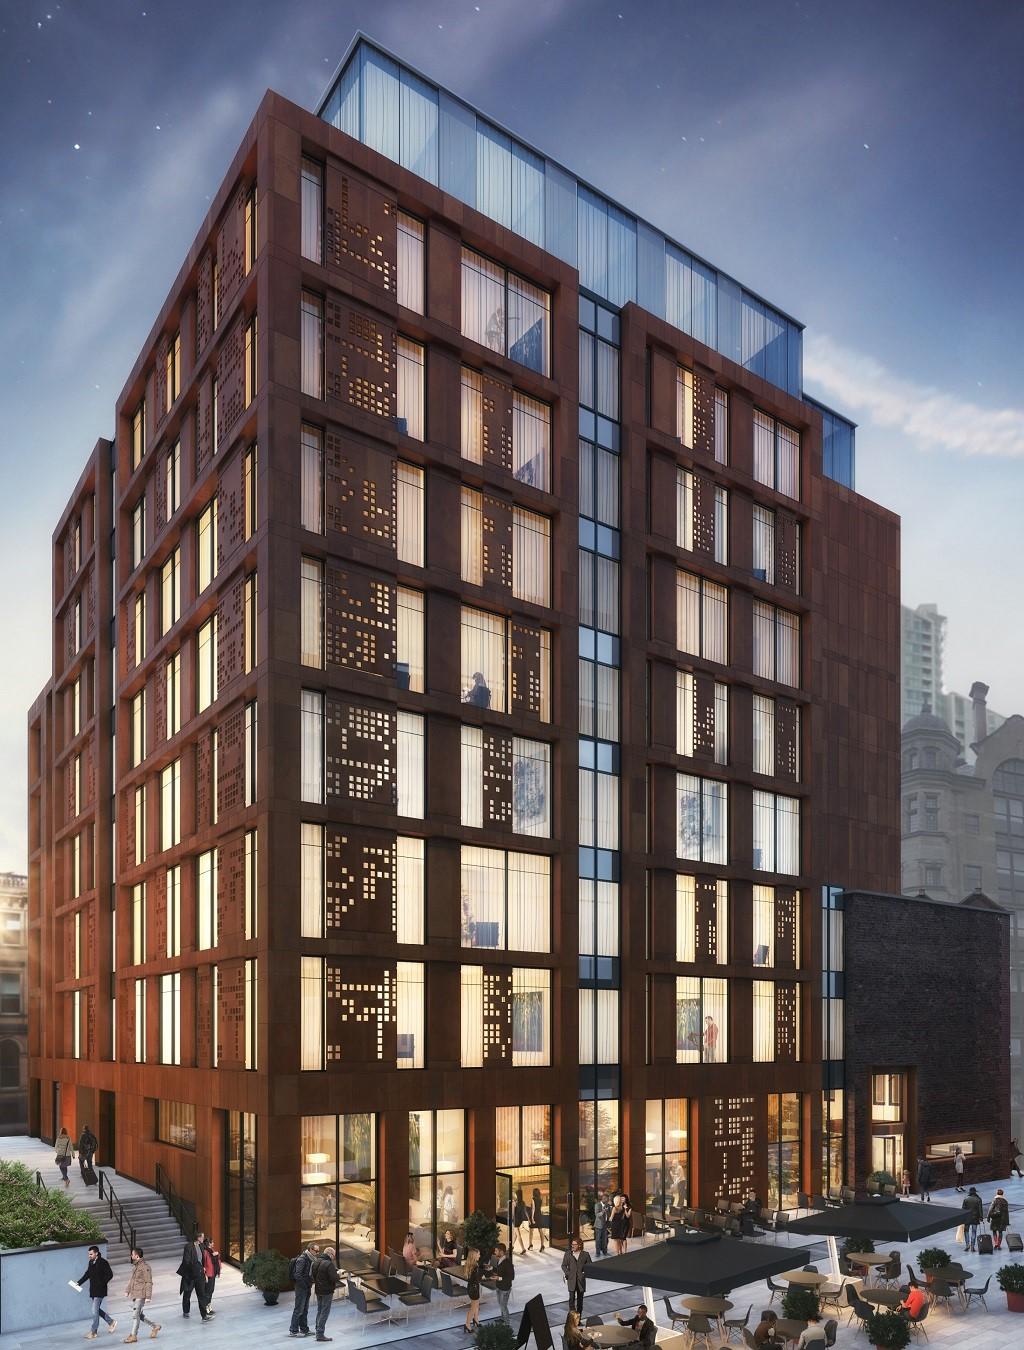 Below: Moxy Hotels have won planning approval for a 130-bedroom hotel in the heart of Spinningfields Key Headlines There are now 1,325 hotel